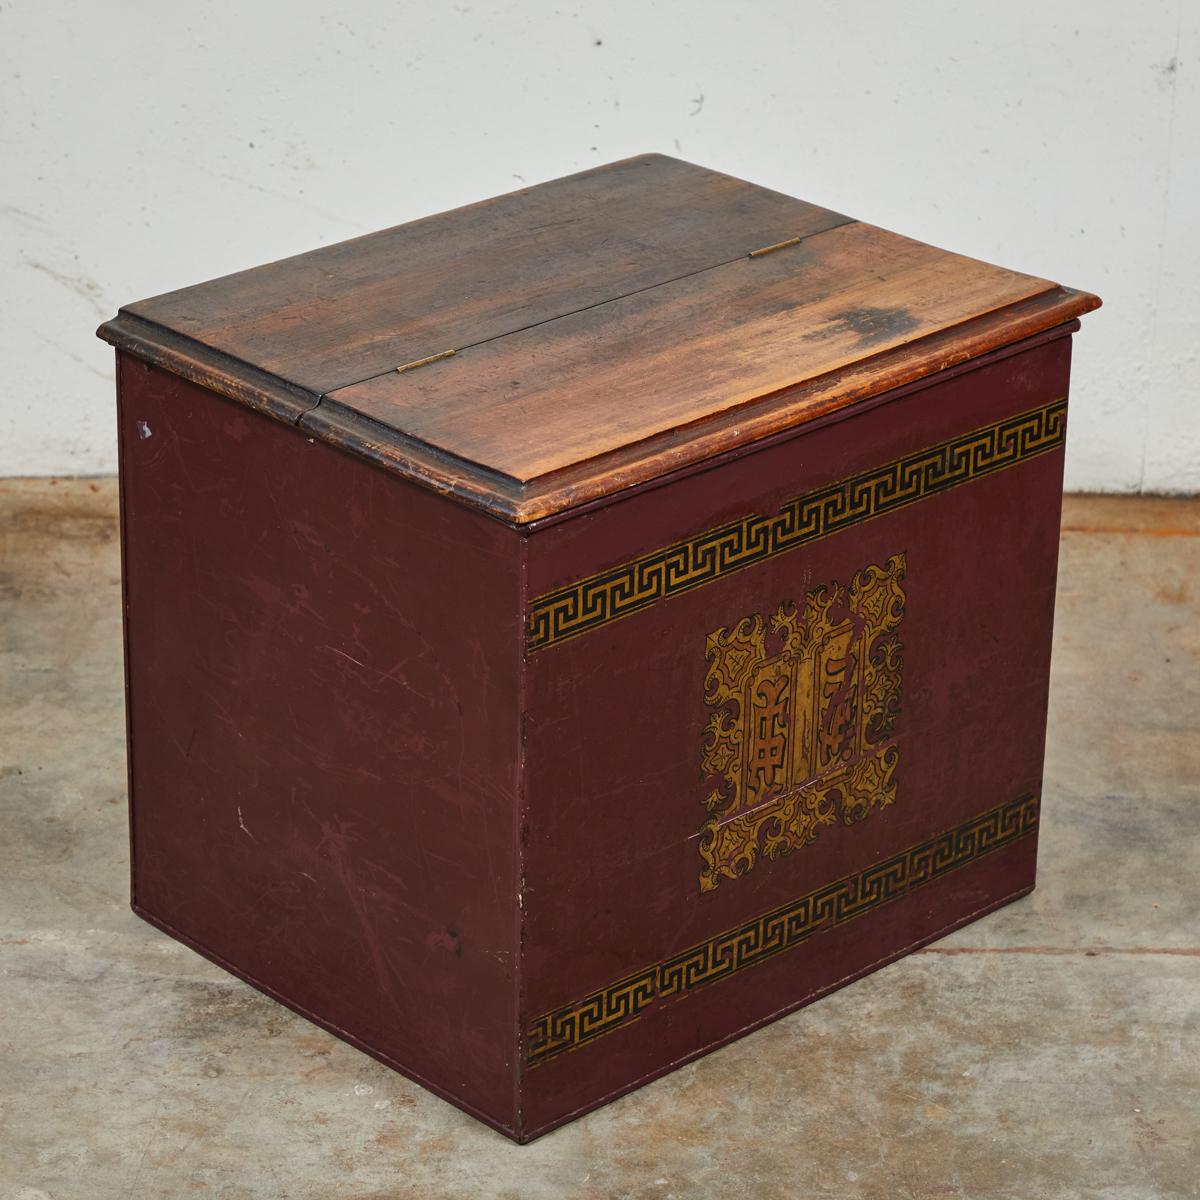 Late 19th-century English imported storage box with hand-painted  gilt Chinese character insignia and Greek key pattern. Features a jointed, hand-carved wooden top and tin siding in a rich maroon color. 

England, circa 1880

Dimensions: 22.5W x 17D